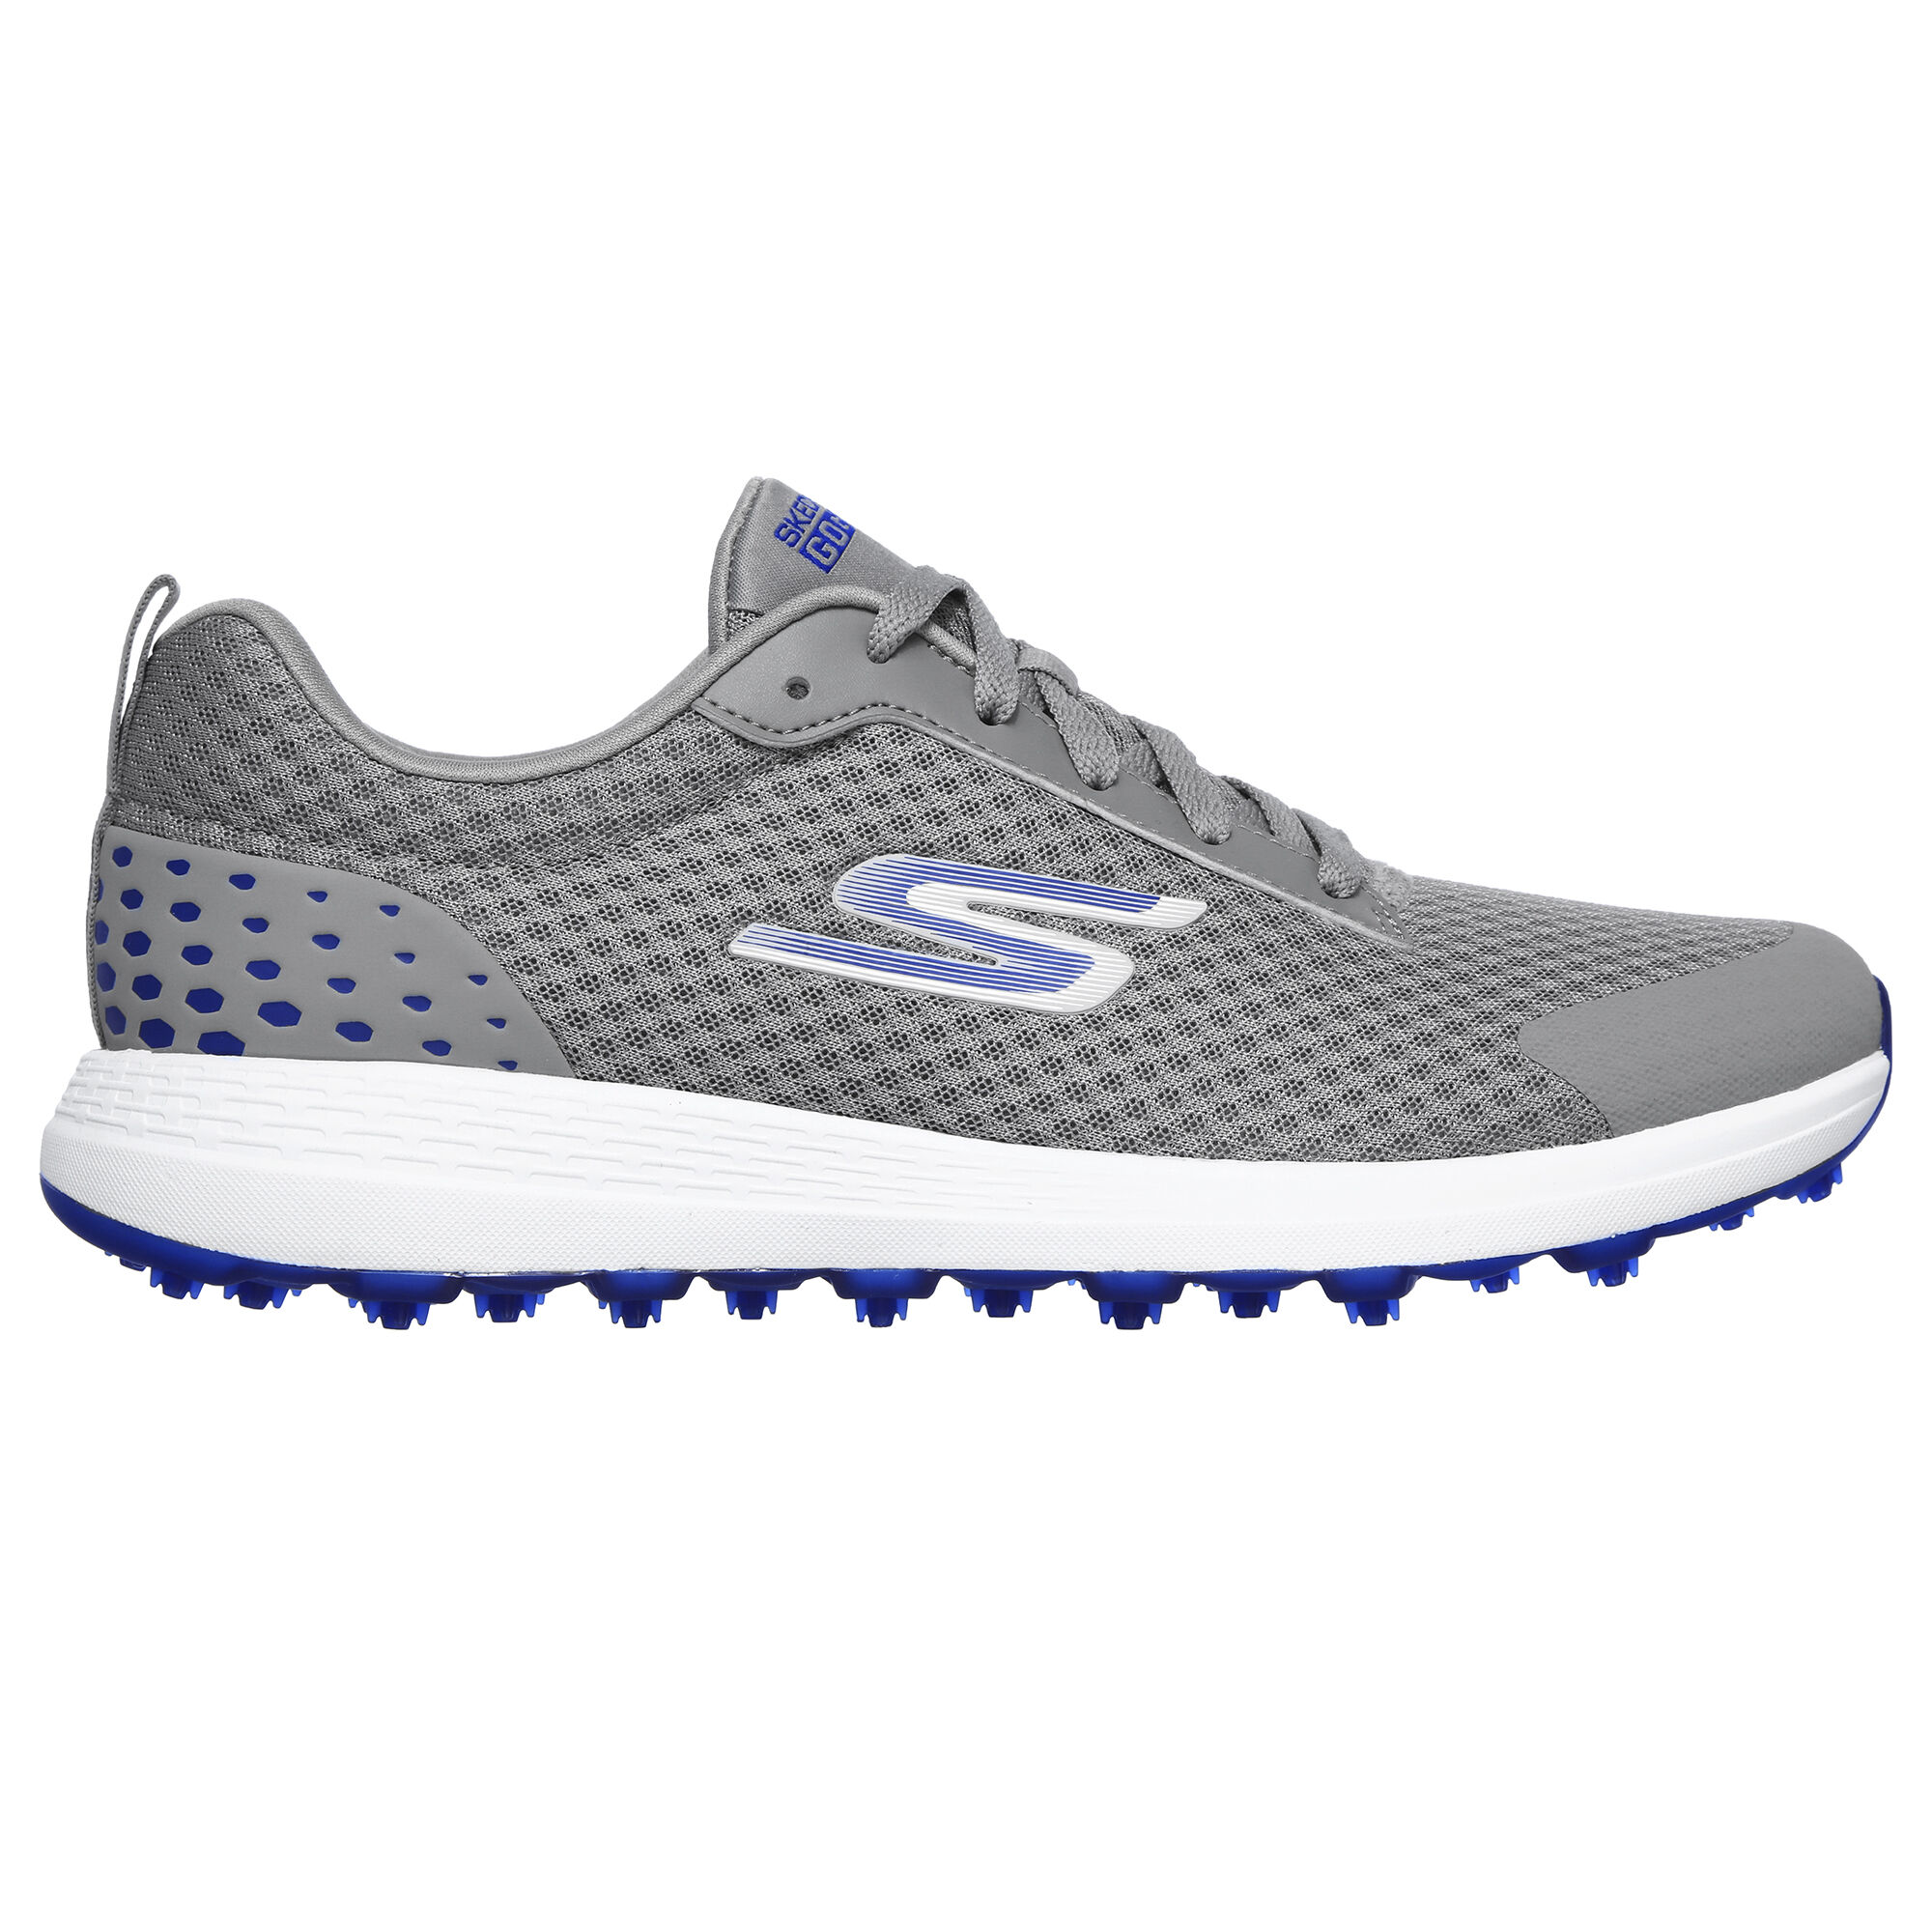 skechers extra wide fit golf shoes